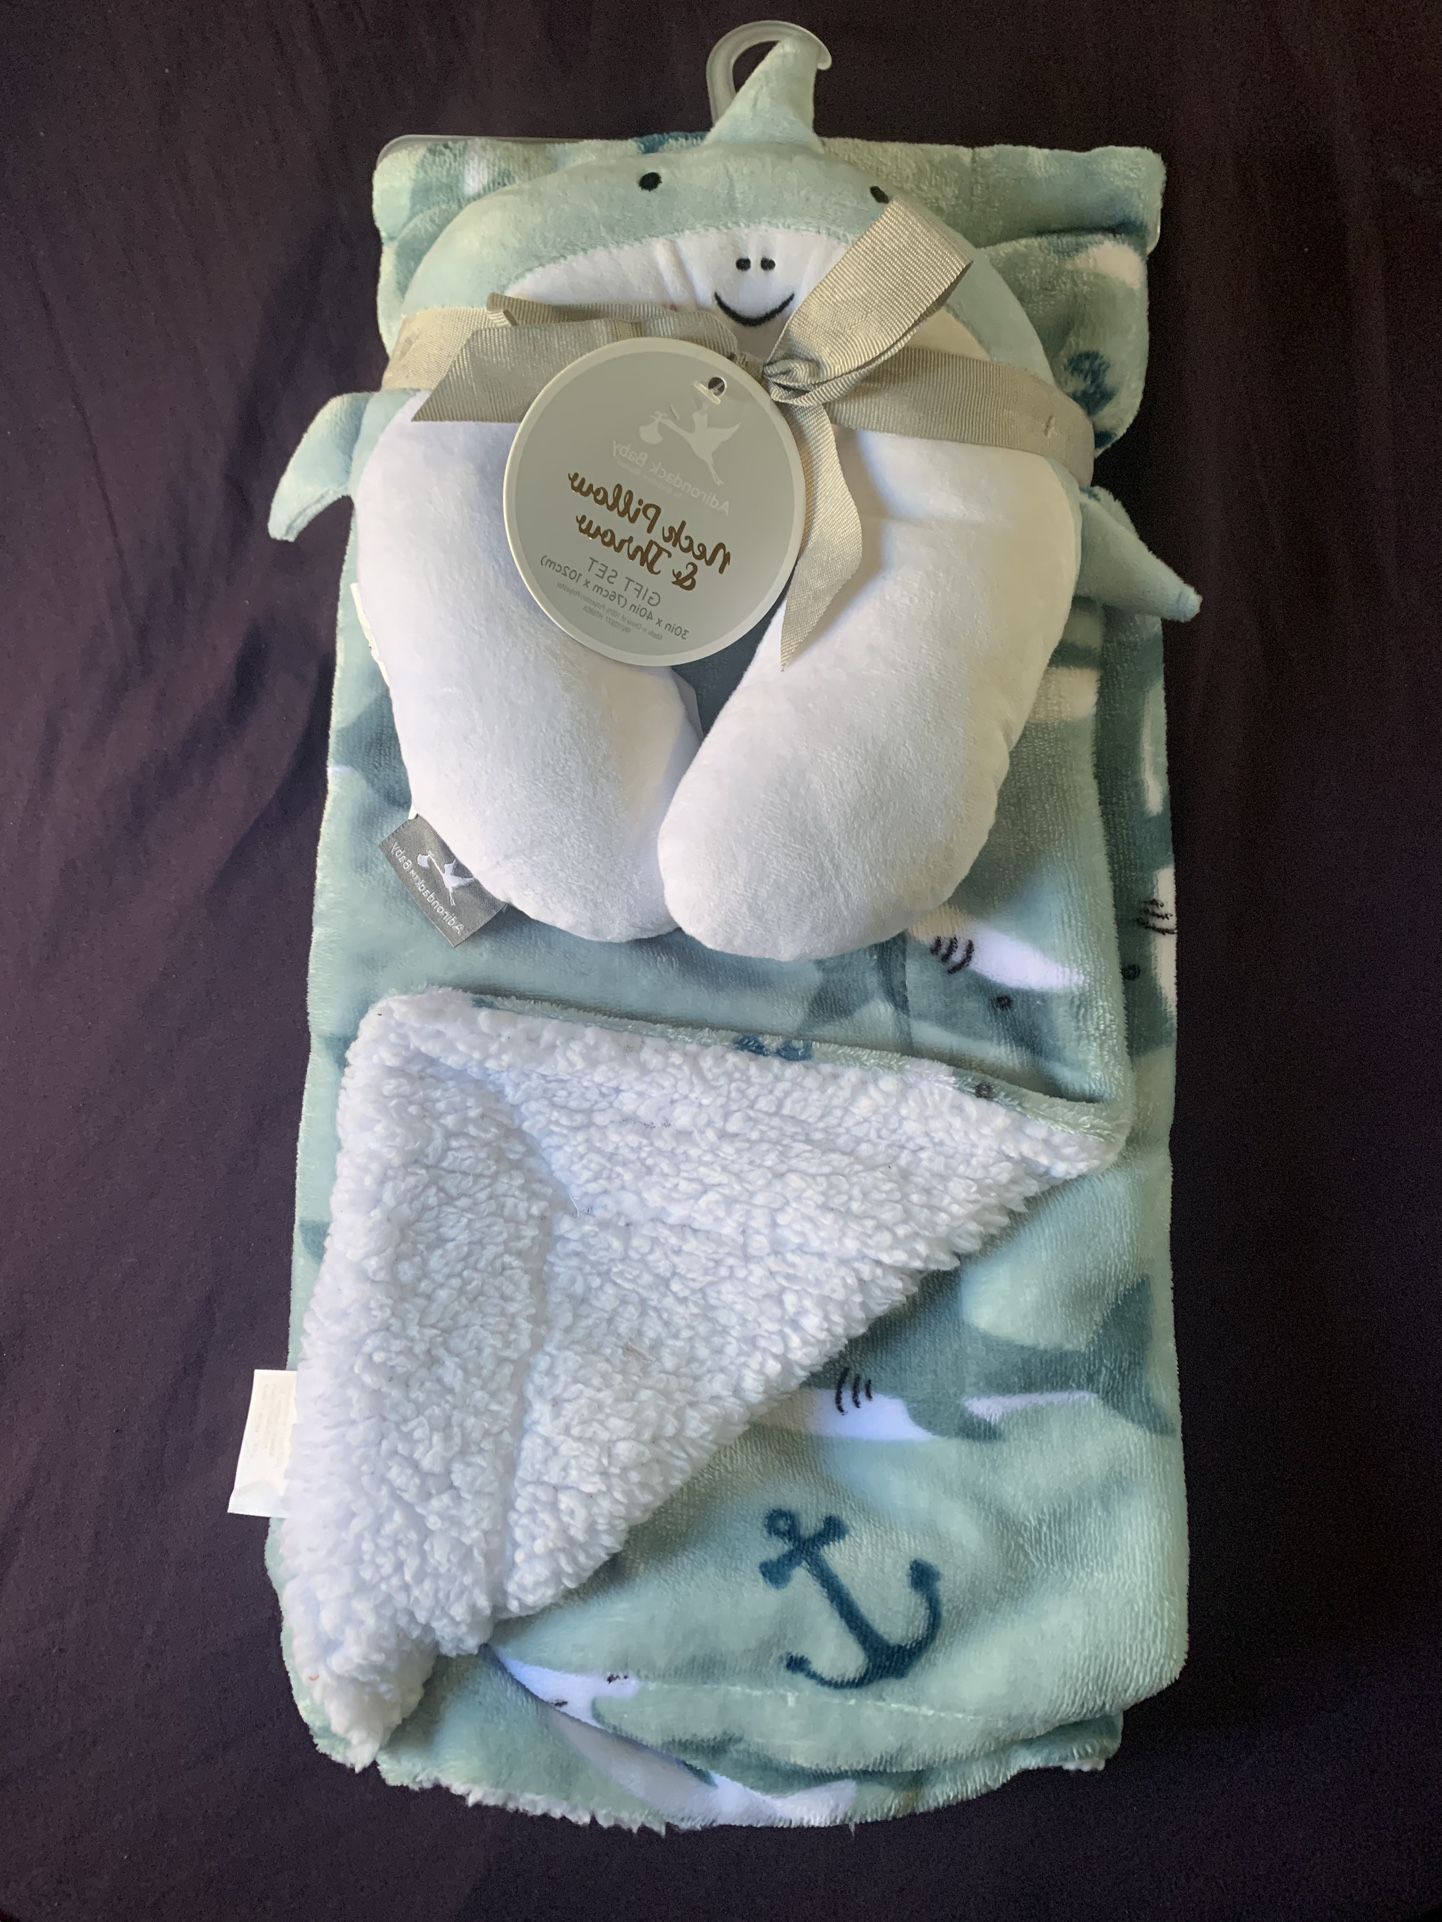 Baby Throw On Blanket And Neck Pillow